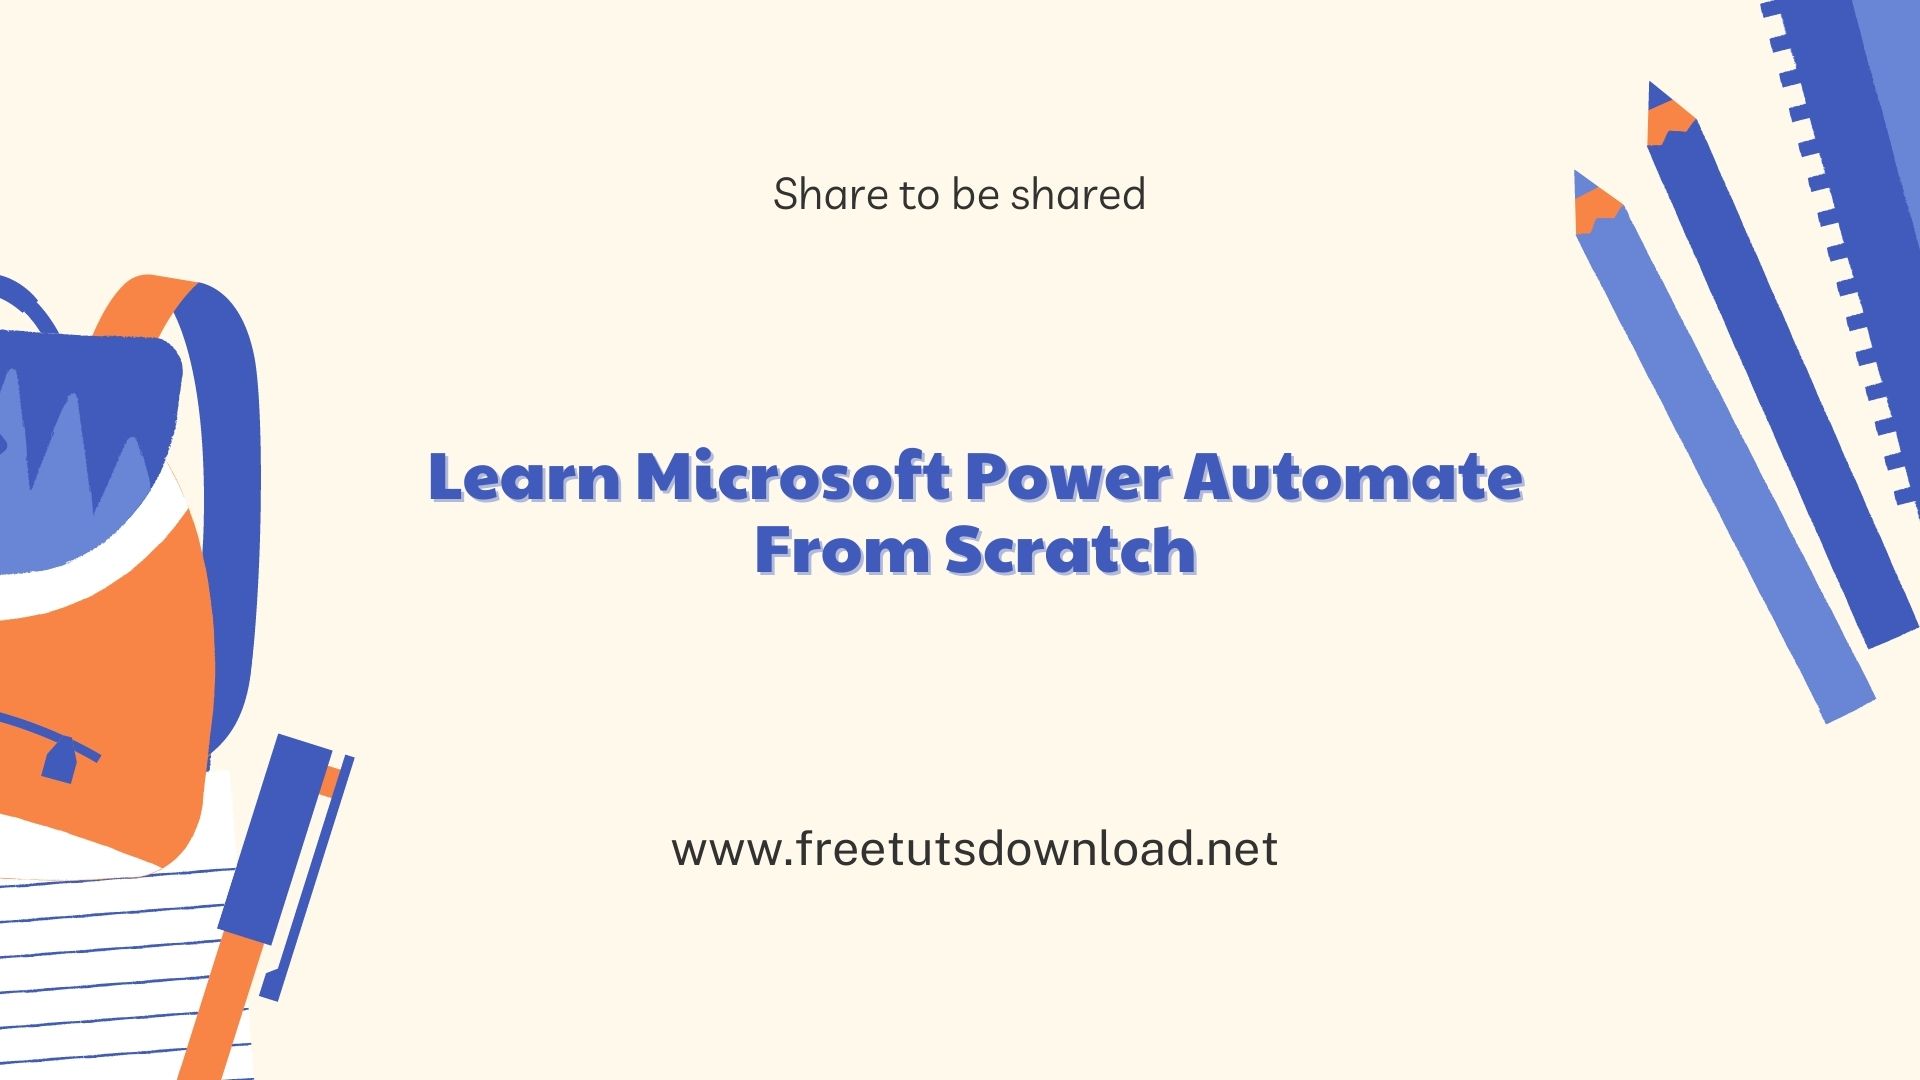 Learn Microsoft Power Automate From Scratch